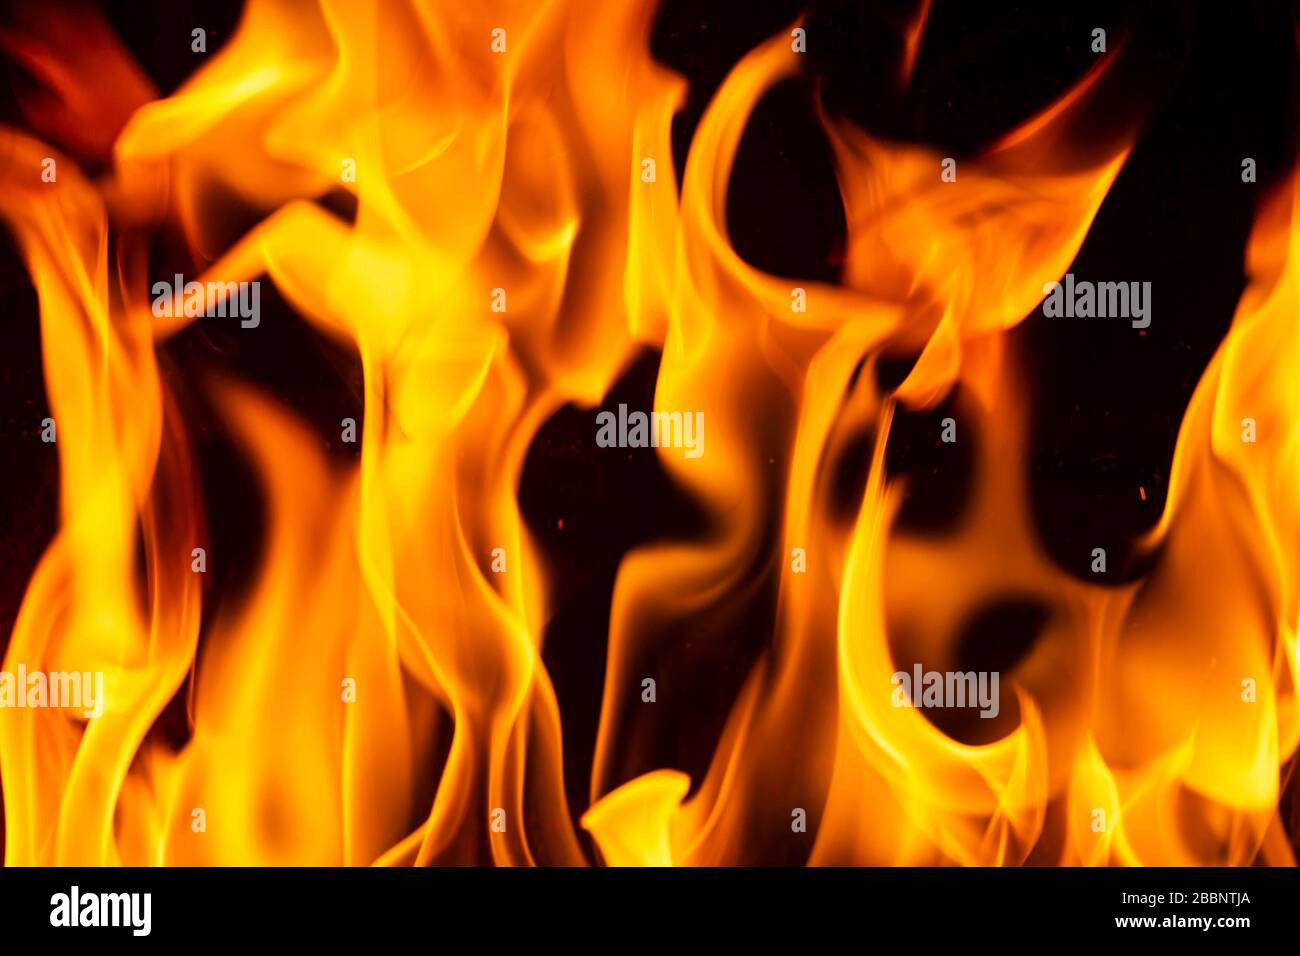 Close up on flamme burning in the fireplace during a cold winter night Stock Photo